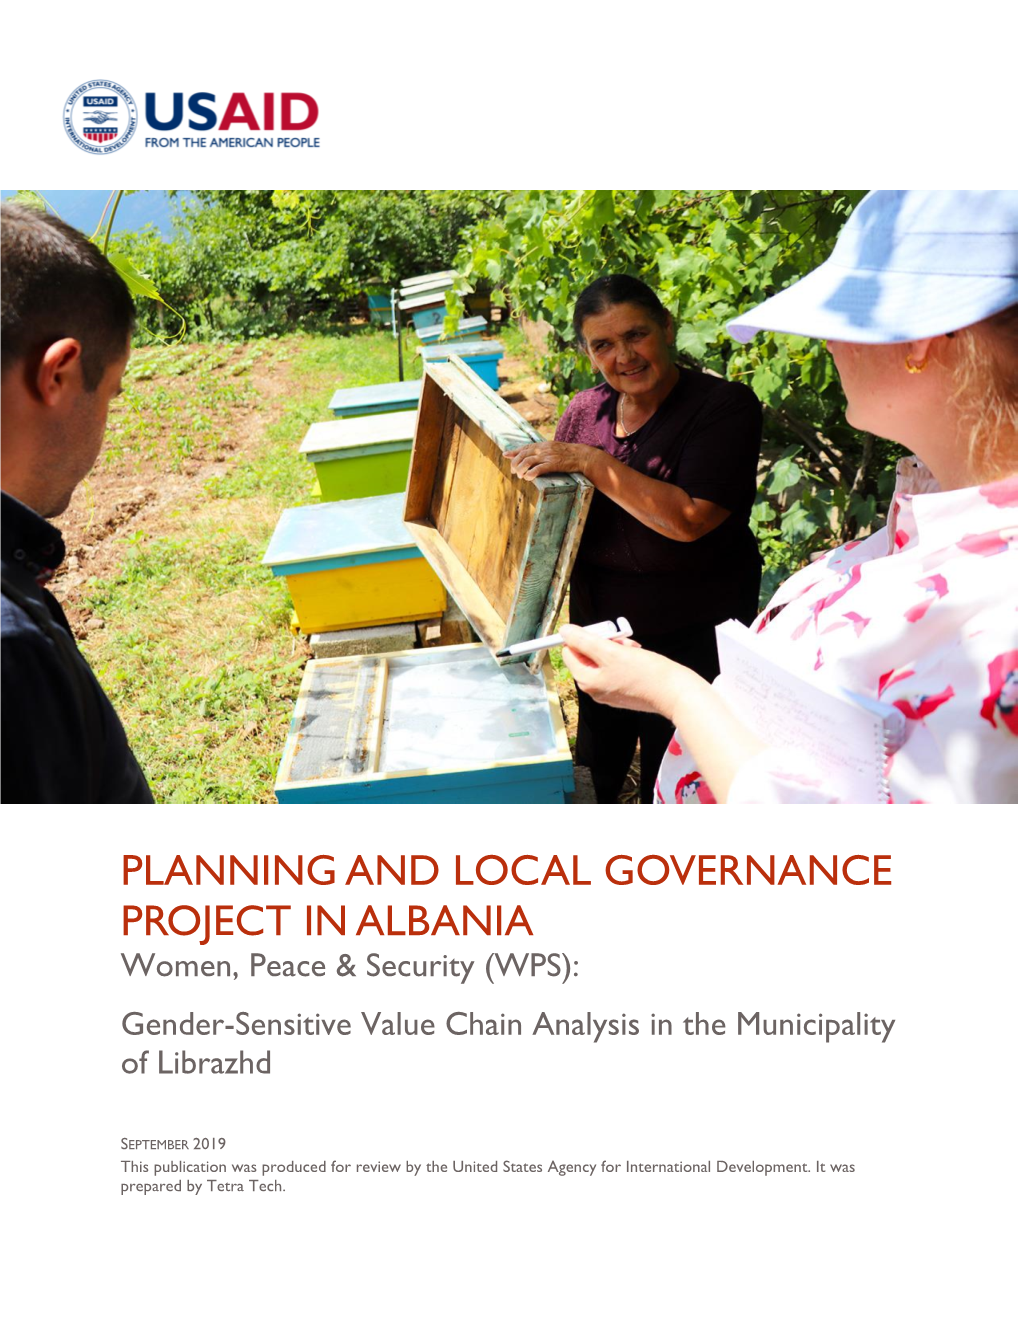 PLANNING and LOCAL GOVERNANCE PROJECT in ALBANIA Women, Peace & Security (WPS): Gender-Sensitive Value Chain Analysis in the Municipality of Librazhd